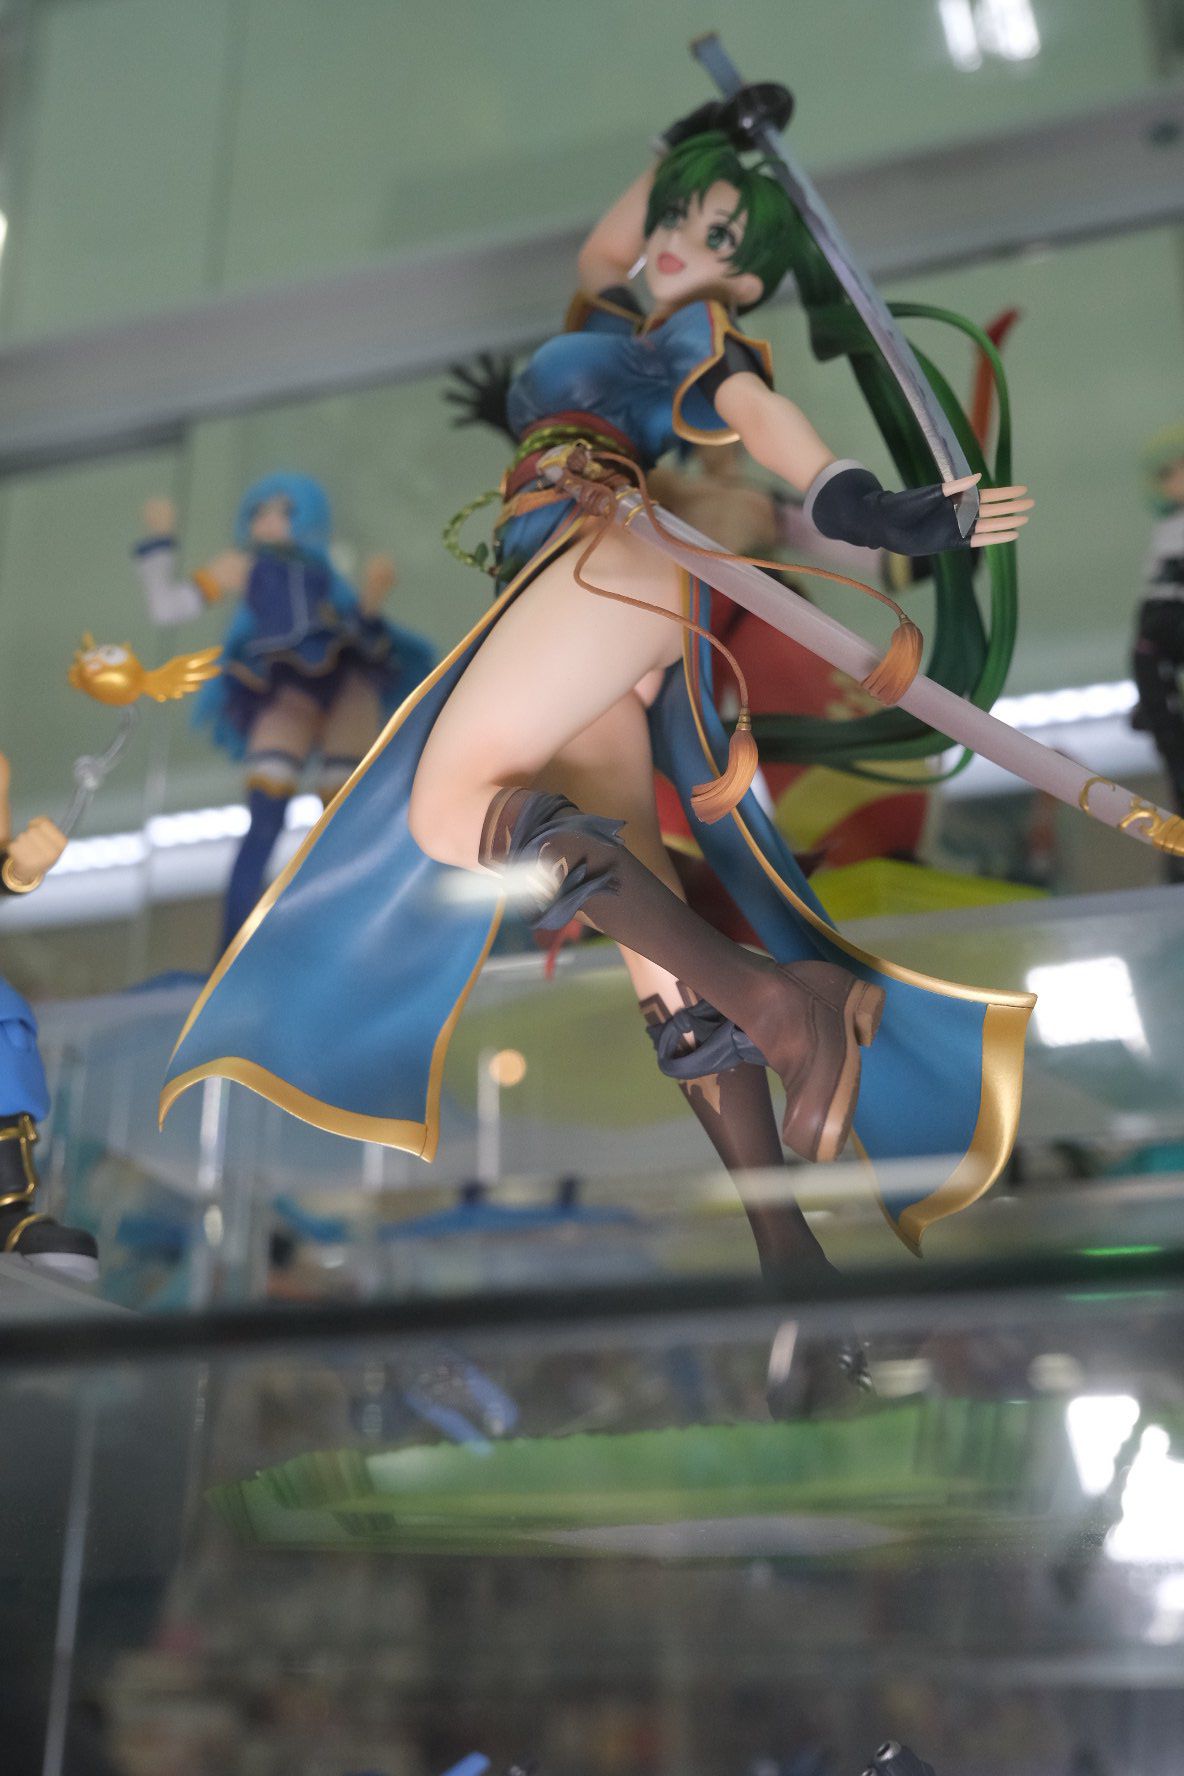 [Sad news] Fire Emblem will release a figure that is too erotic 2